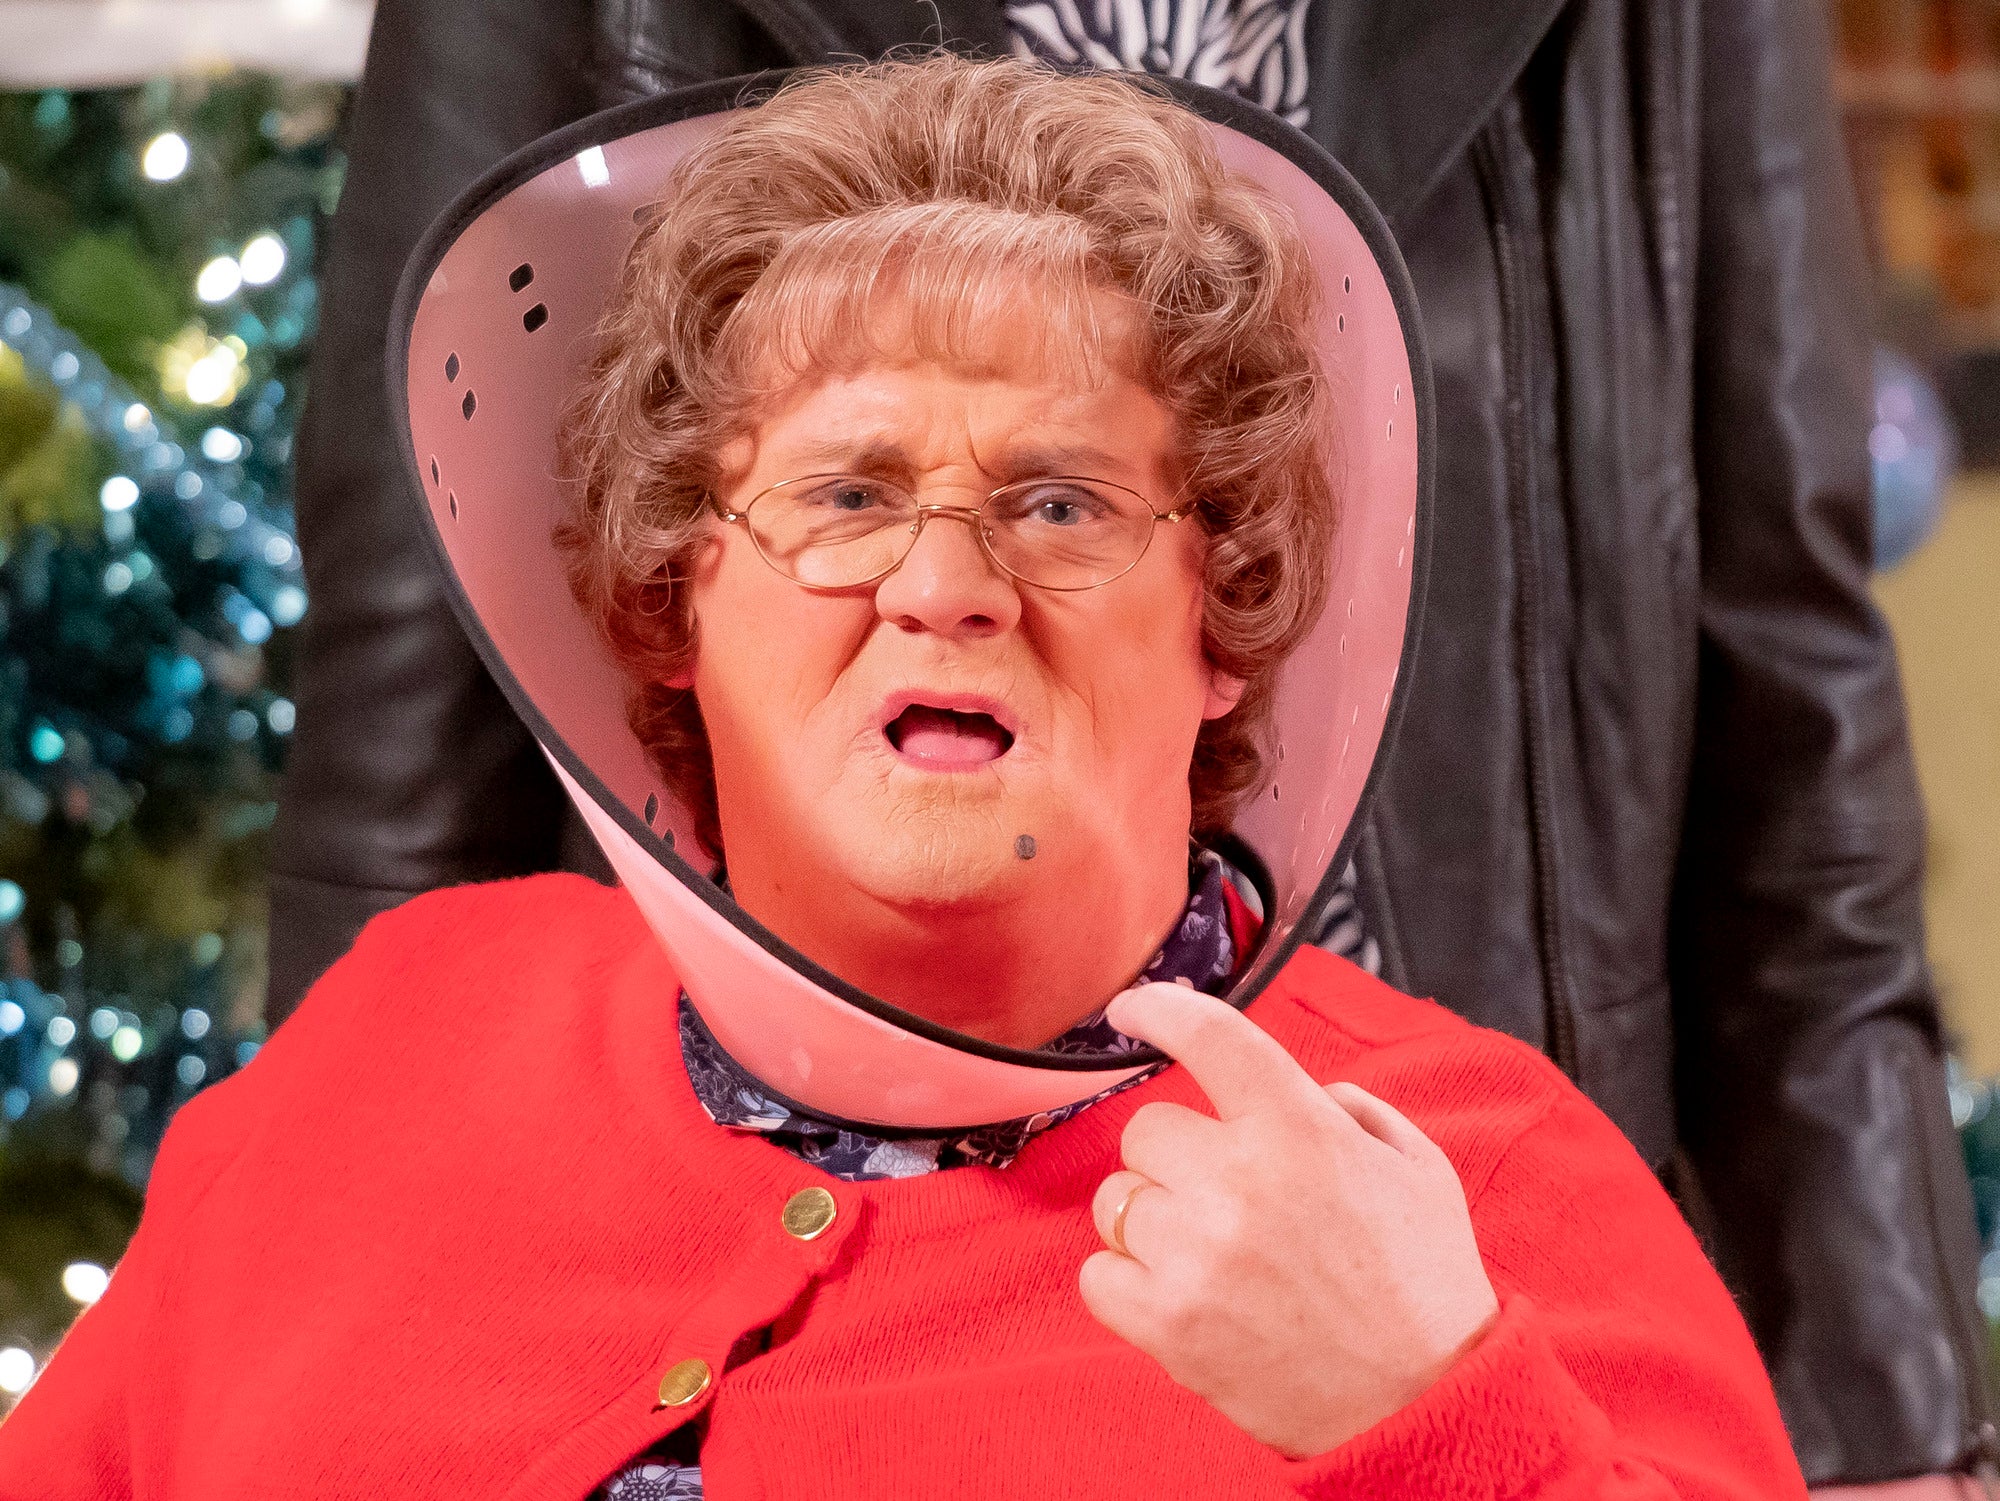 Liable to irritate: Agnes Brown (Brendan O’Carroll) is fitted with a protective cone in the Mrs Brown’s Boys Christmas special